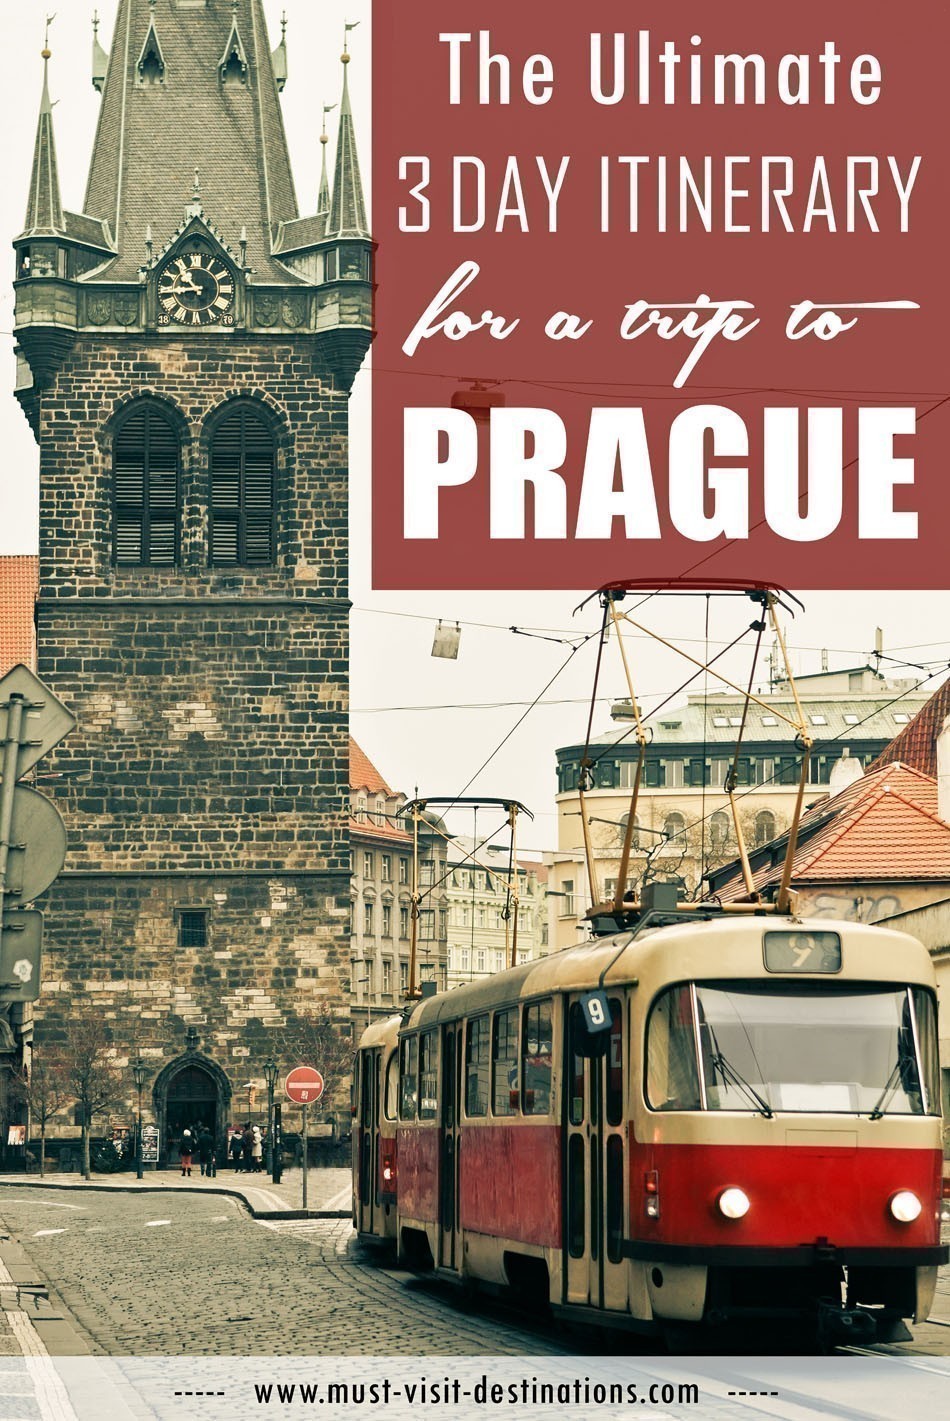 The Ultimate 3-Day Itinerary for a Trip to Prague #travel #prague 